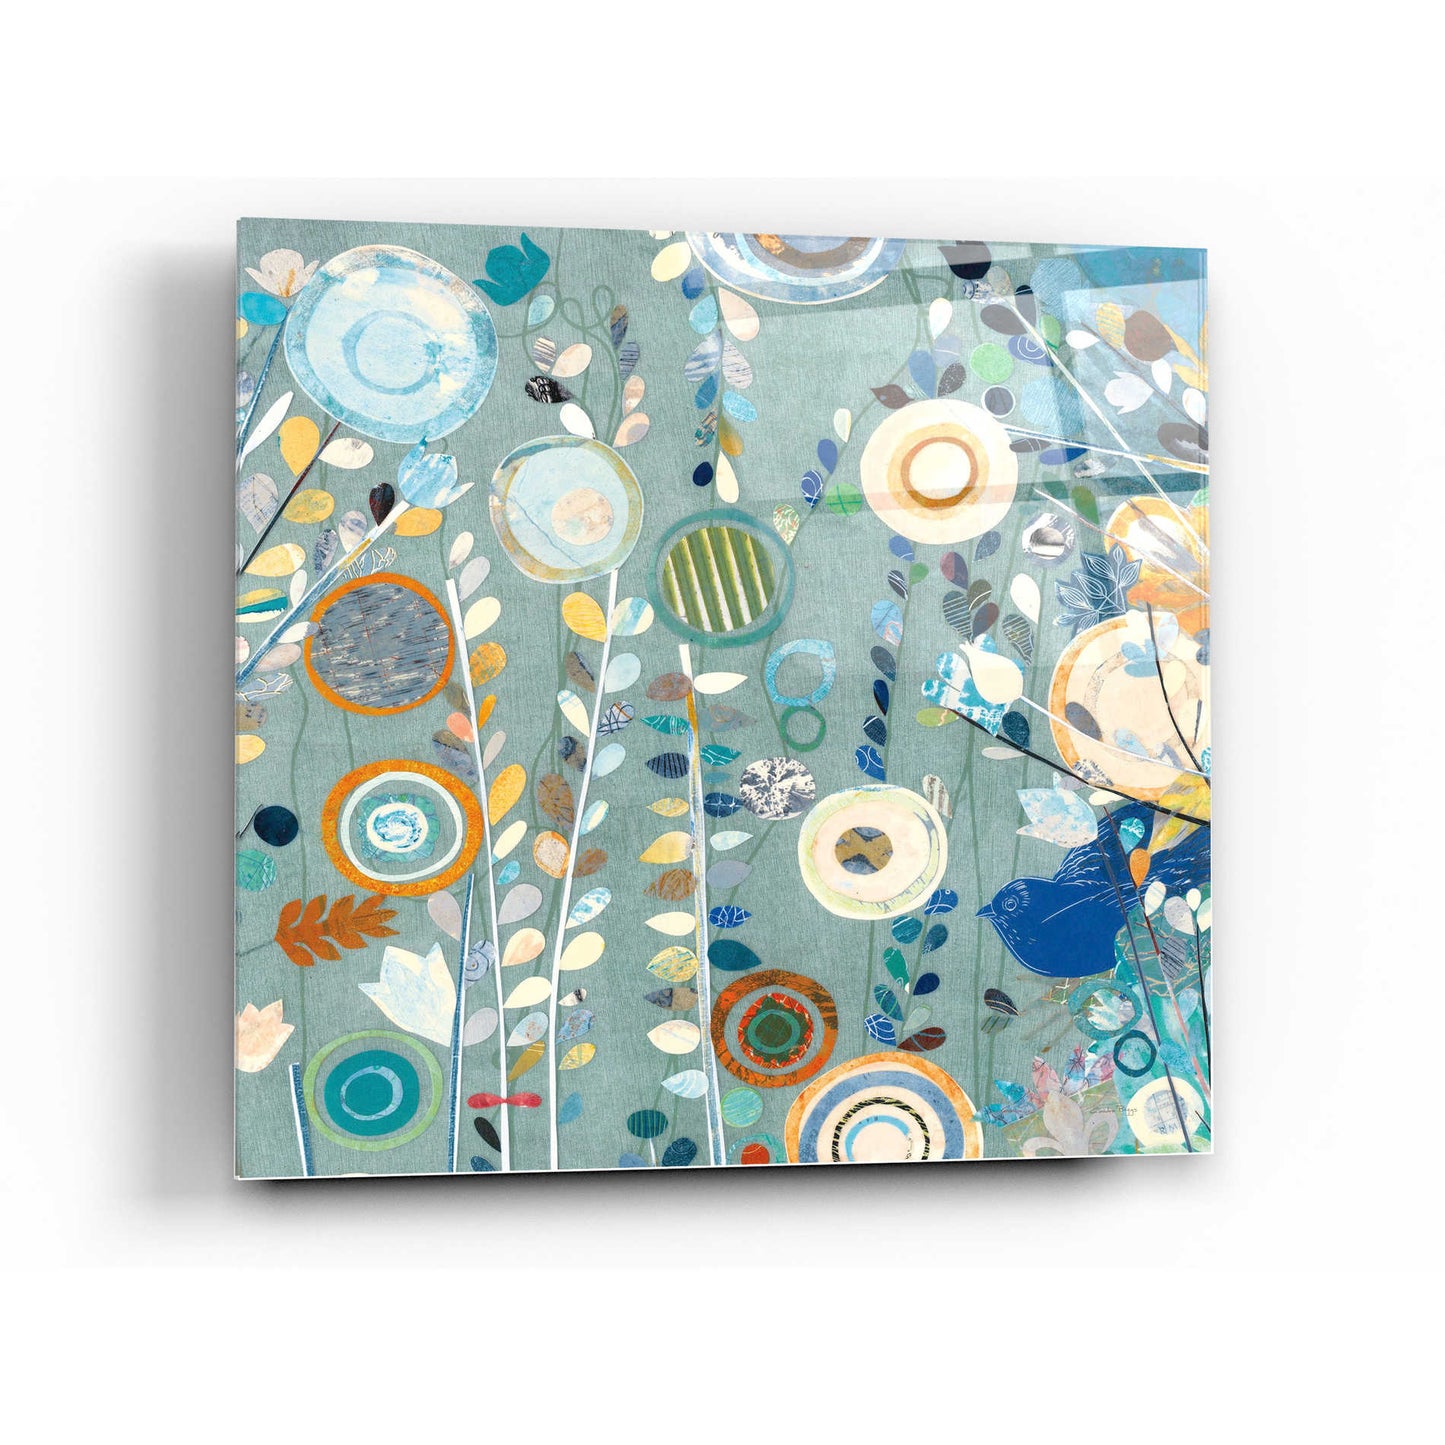 Epic Art 'Ocean Garden II Square' by Candra Boggs, Acrylic Glass Wall Art,24x24